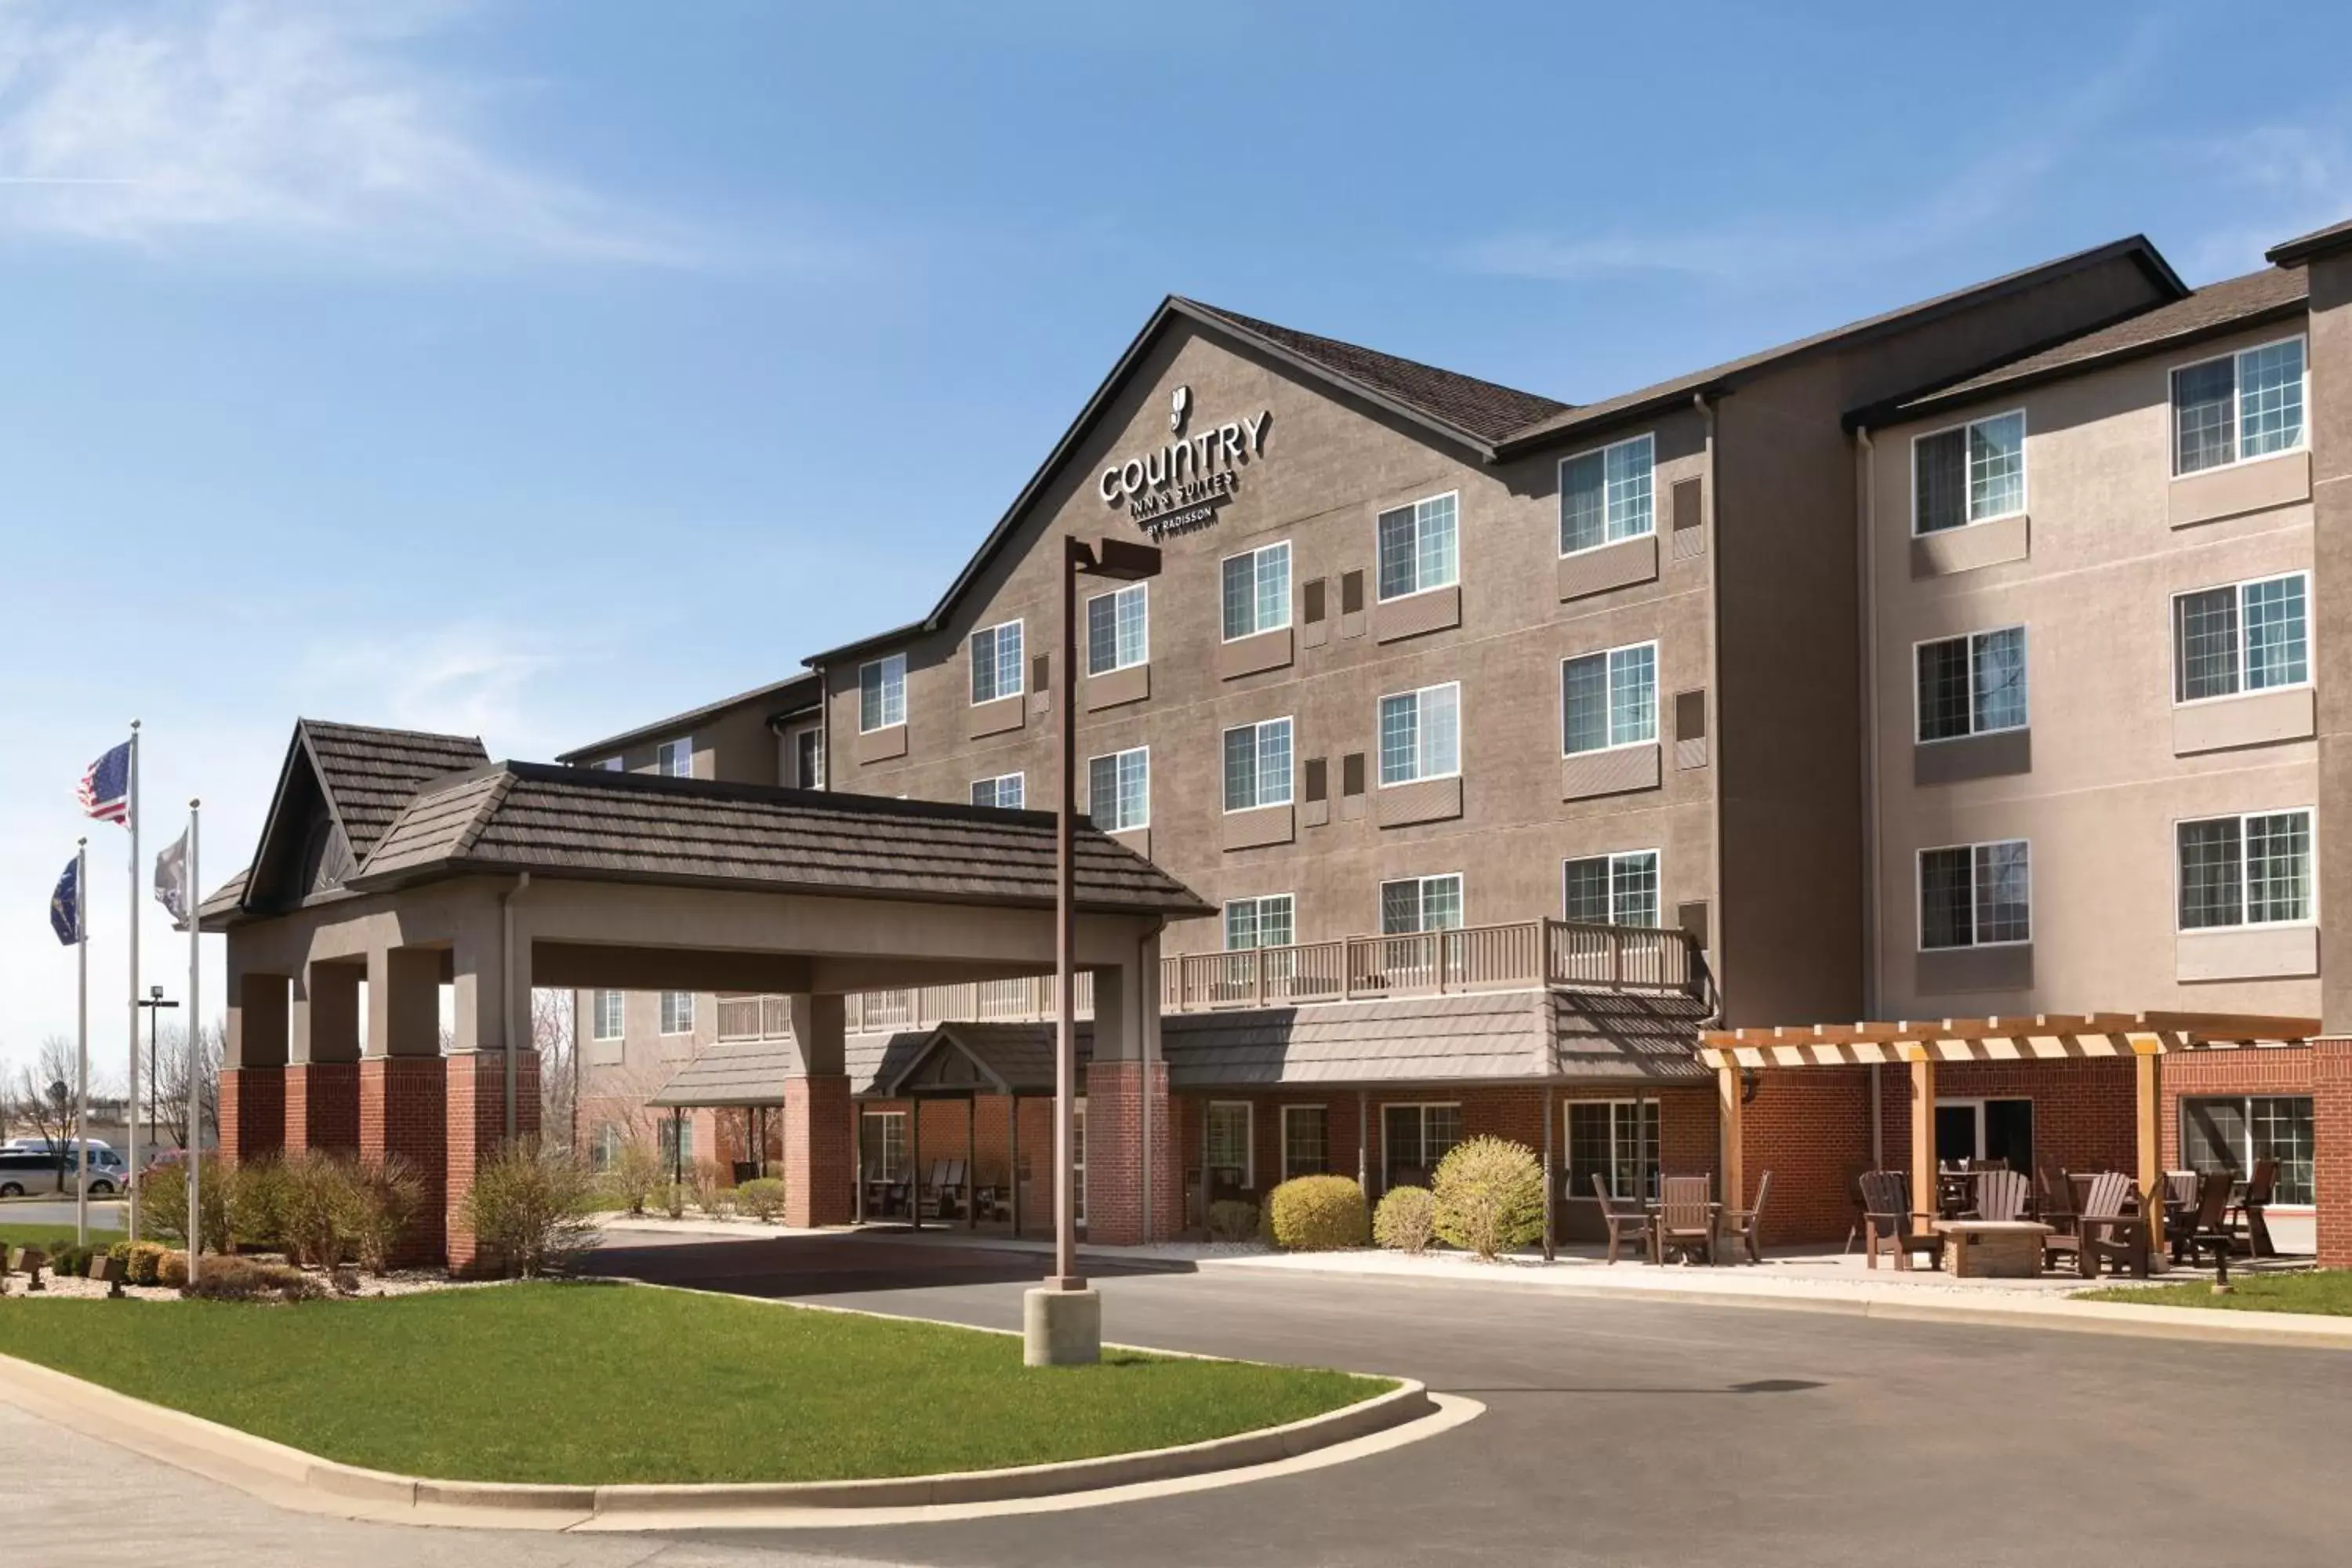 Facade/entrance, Property Building in Country Inn & Suites by Radisson, Indianapolis Airport South, IN